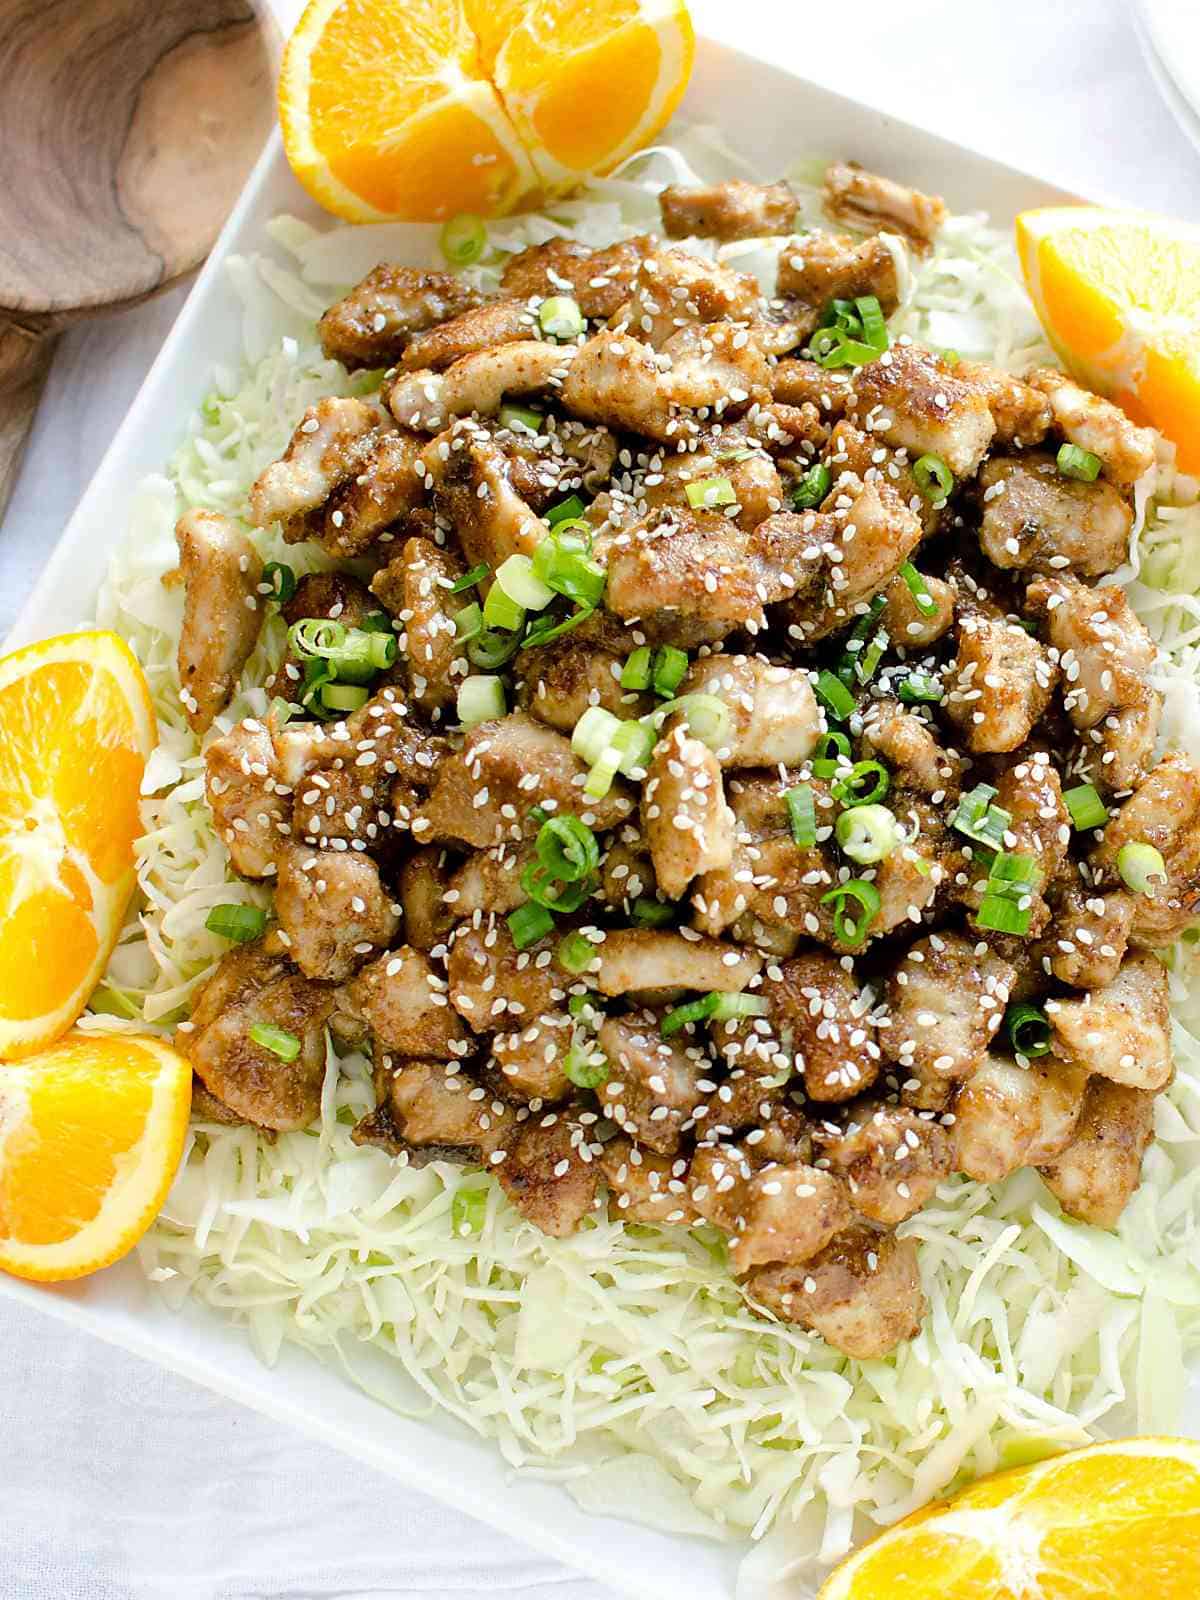 platter of homemade orange chicken served over a bed of cabbage, garnished with orange slices, green onions and sesame seeds.